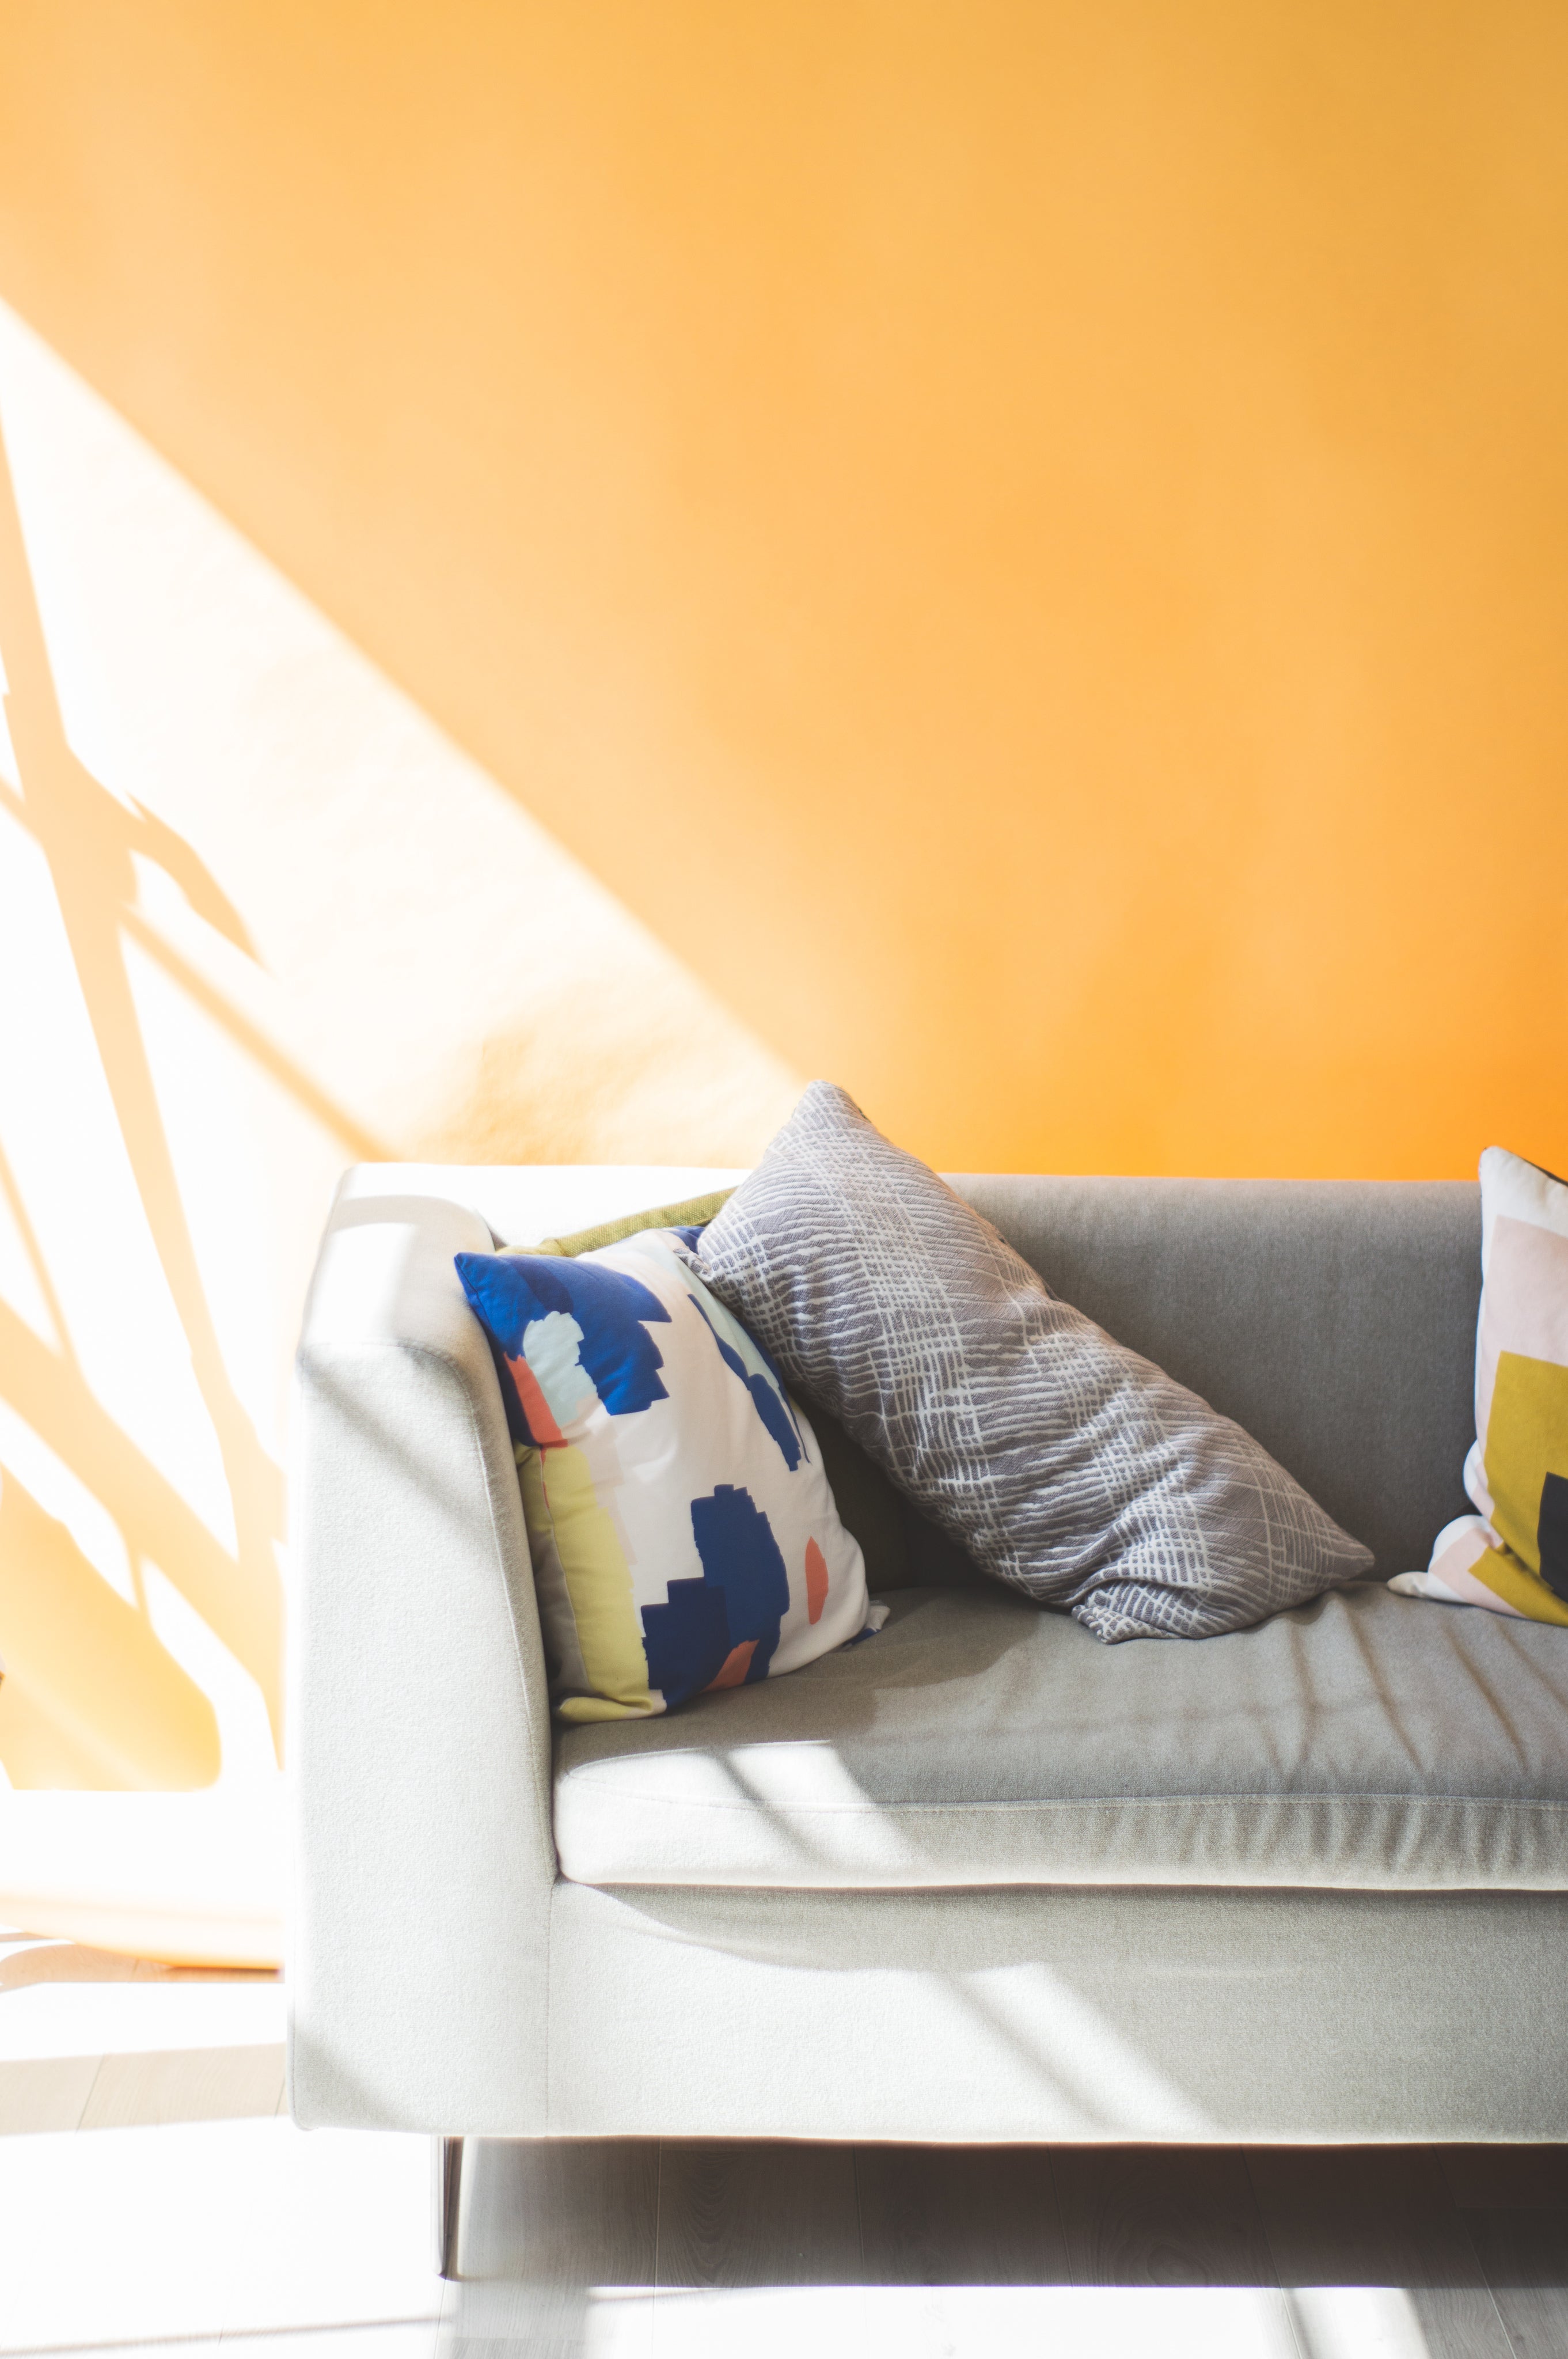 Sun streaming over a grey sofa with multicolor print and grey pillows against a yellow wall